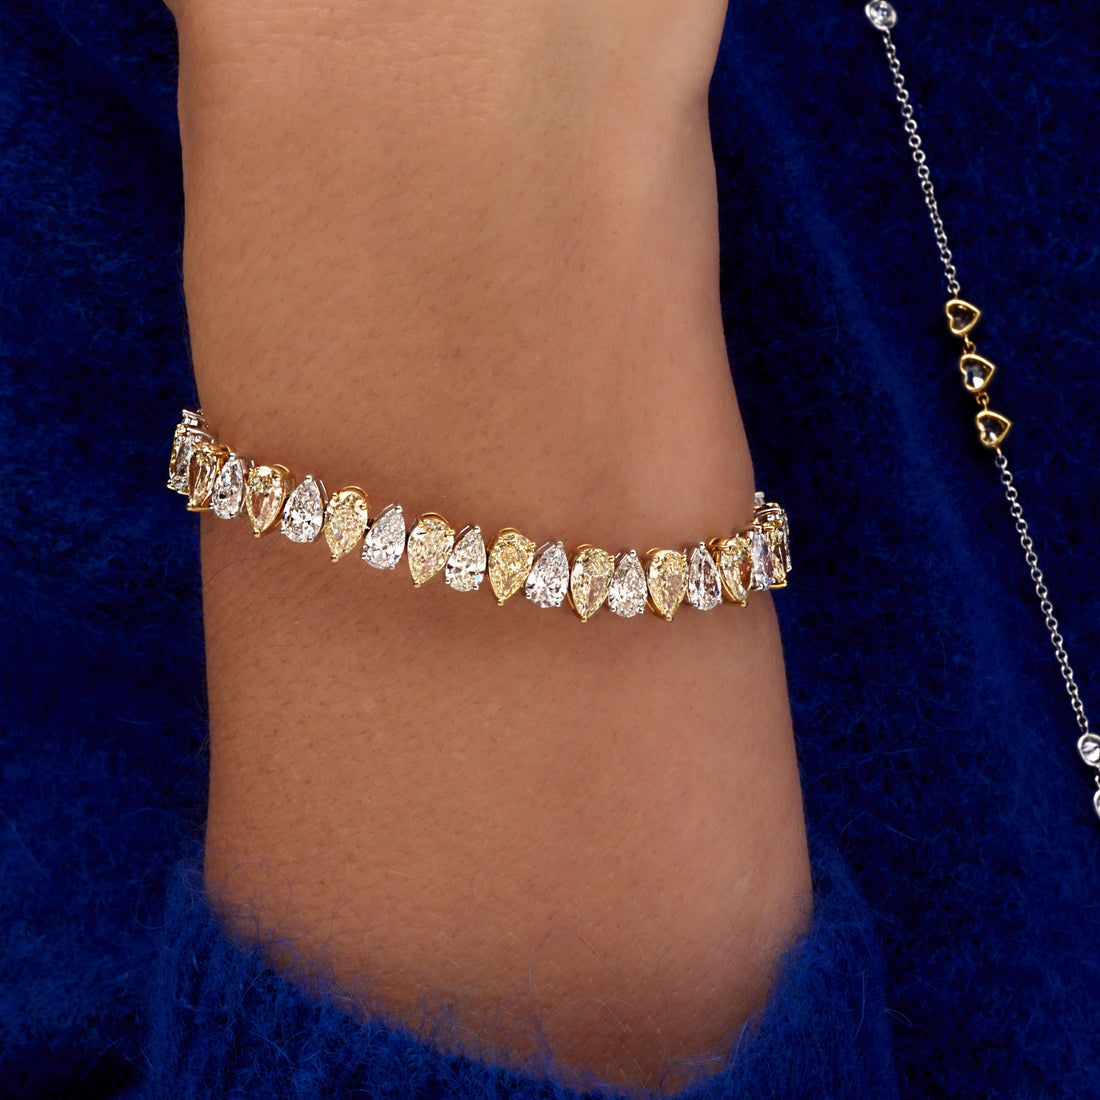 19.52 CT. Alternating Fancy Yellow Diamond and Pear Cut Diamond Bracelet in 18K White Gold and Yellow Gold